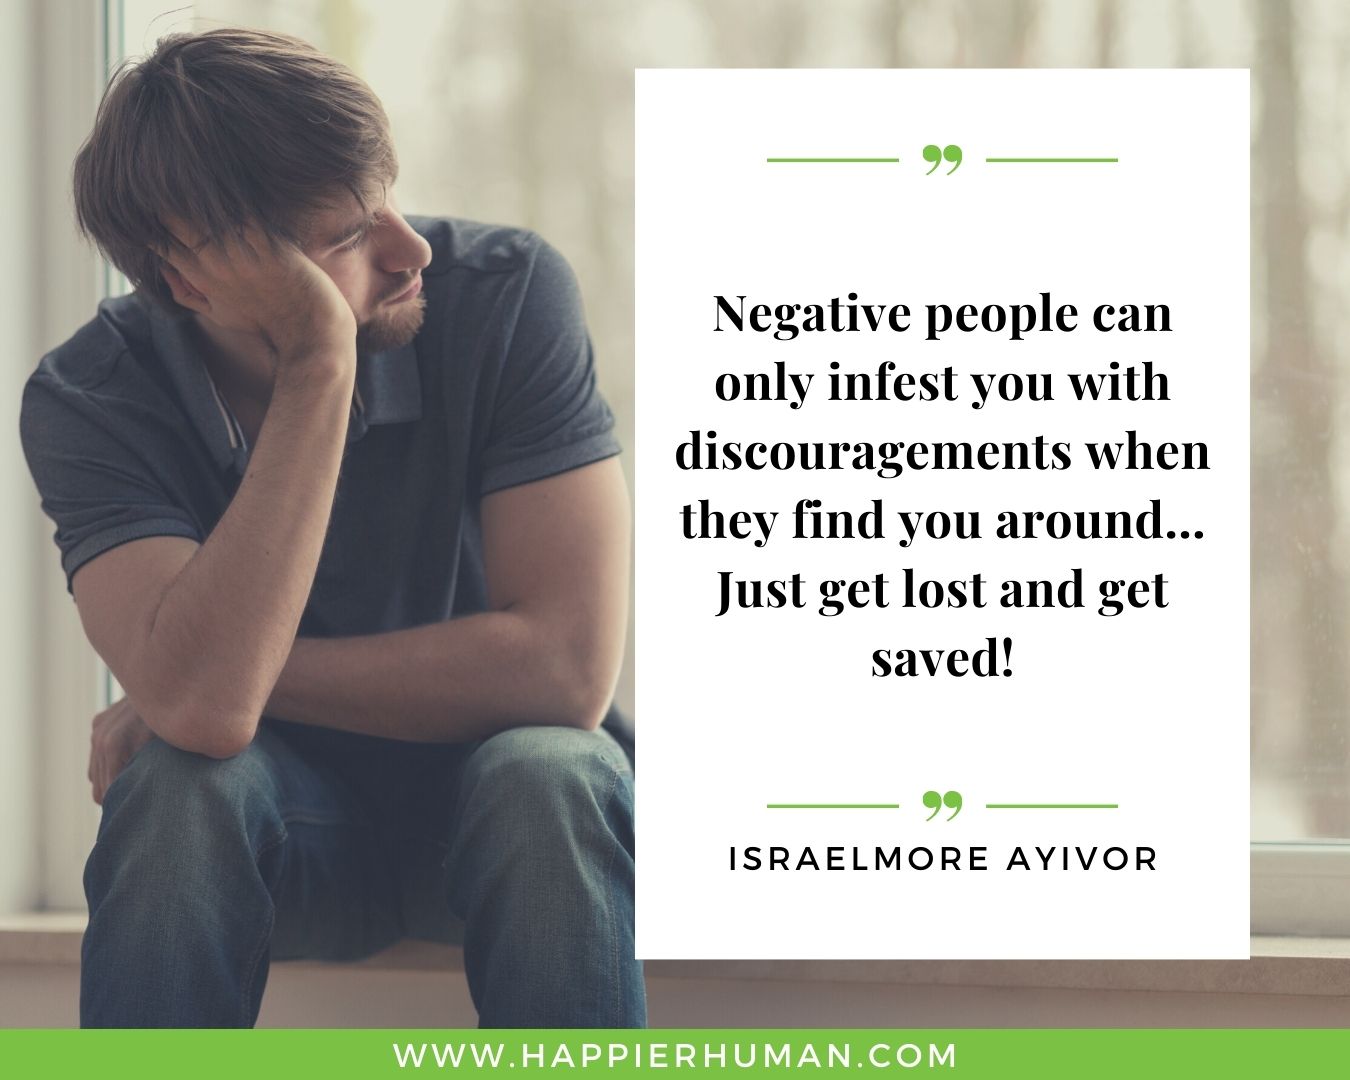 Toxic People Quotes - “Negative people can only infest you with discouragements when they find you around… Just get lost and get saved!” – Israelmore Ayivor